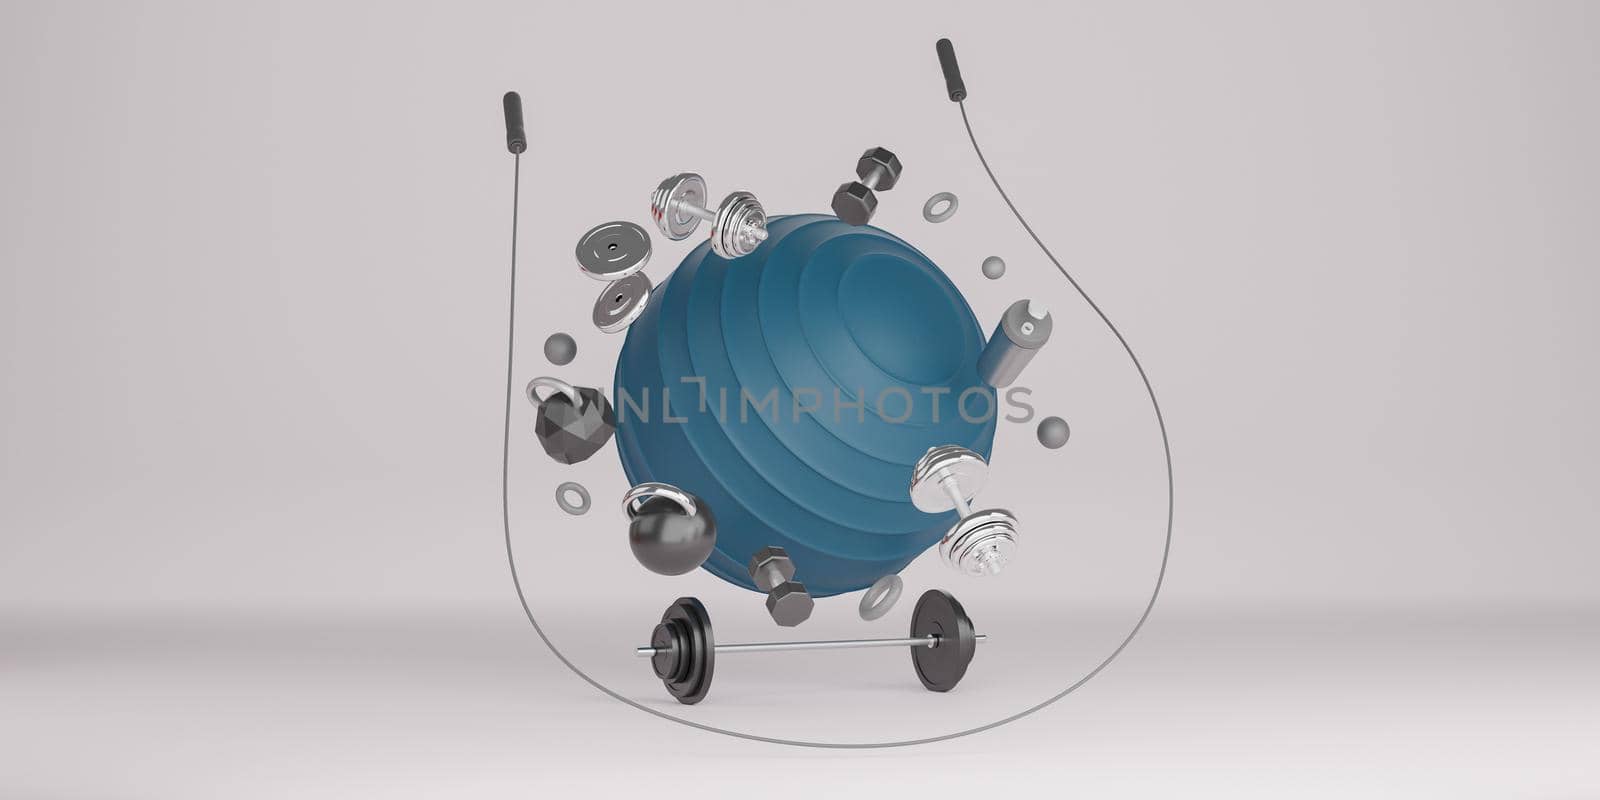 Sport fitness equipment : Blue yoga fit ball, bottle of water, dumbbells, skipping rope and barbell on white background. 3D rendering.